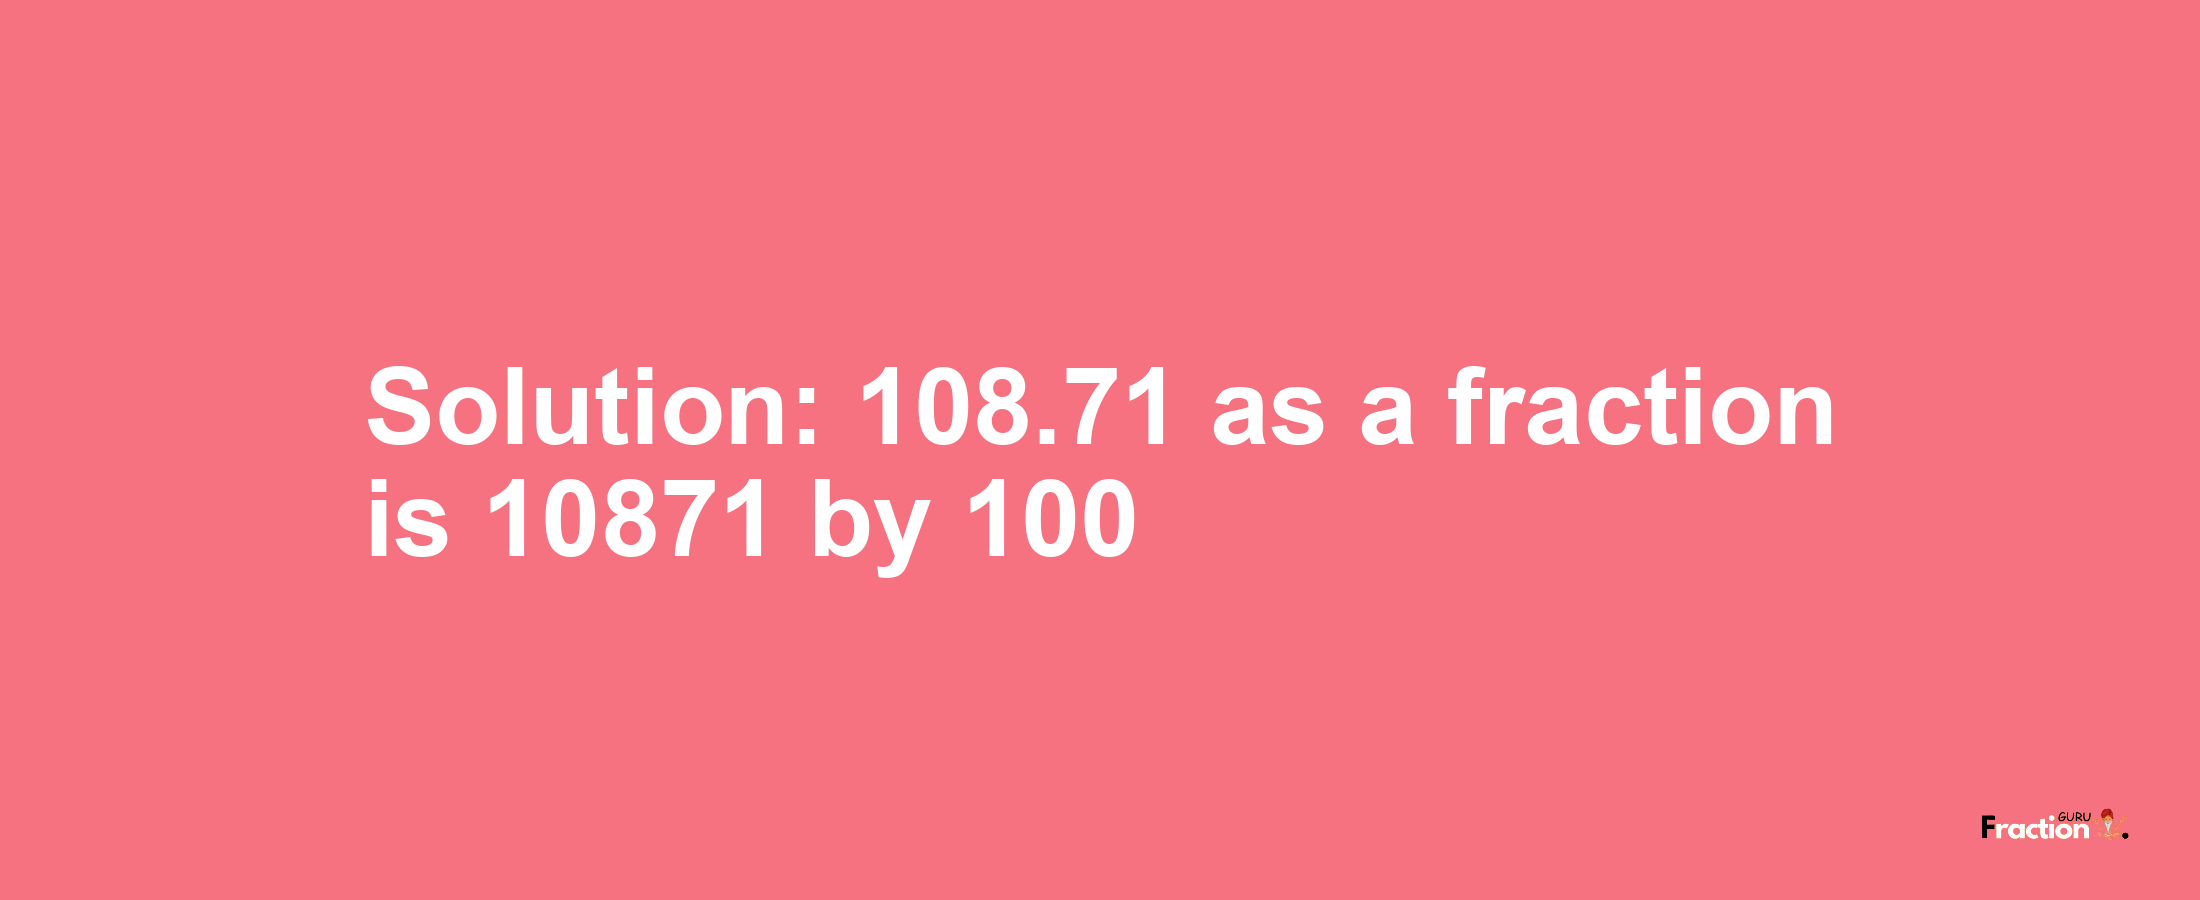 Solution:108.71 as a fraction is 10871/100